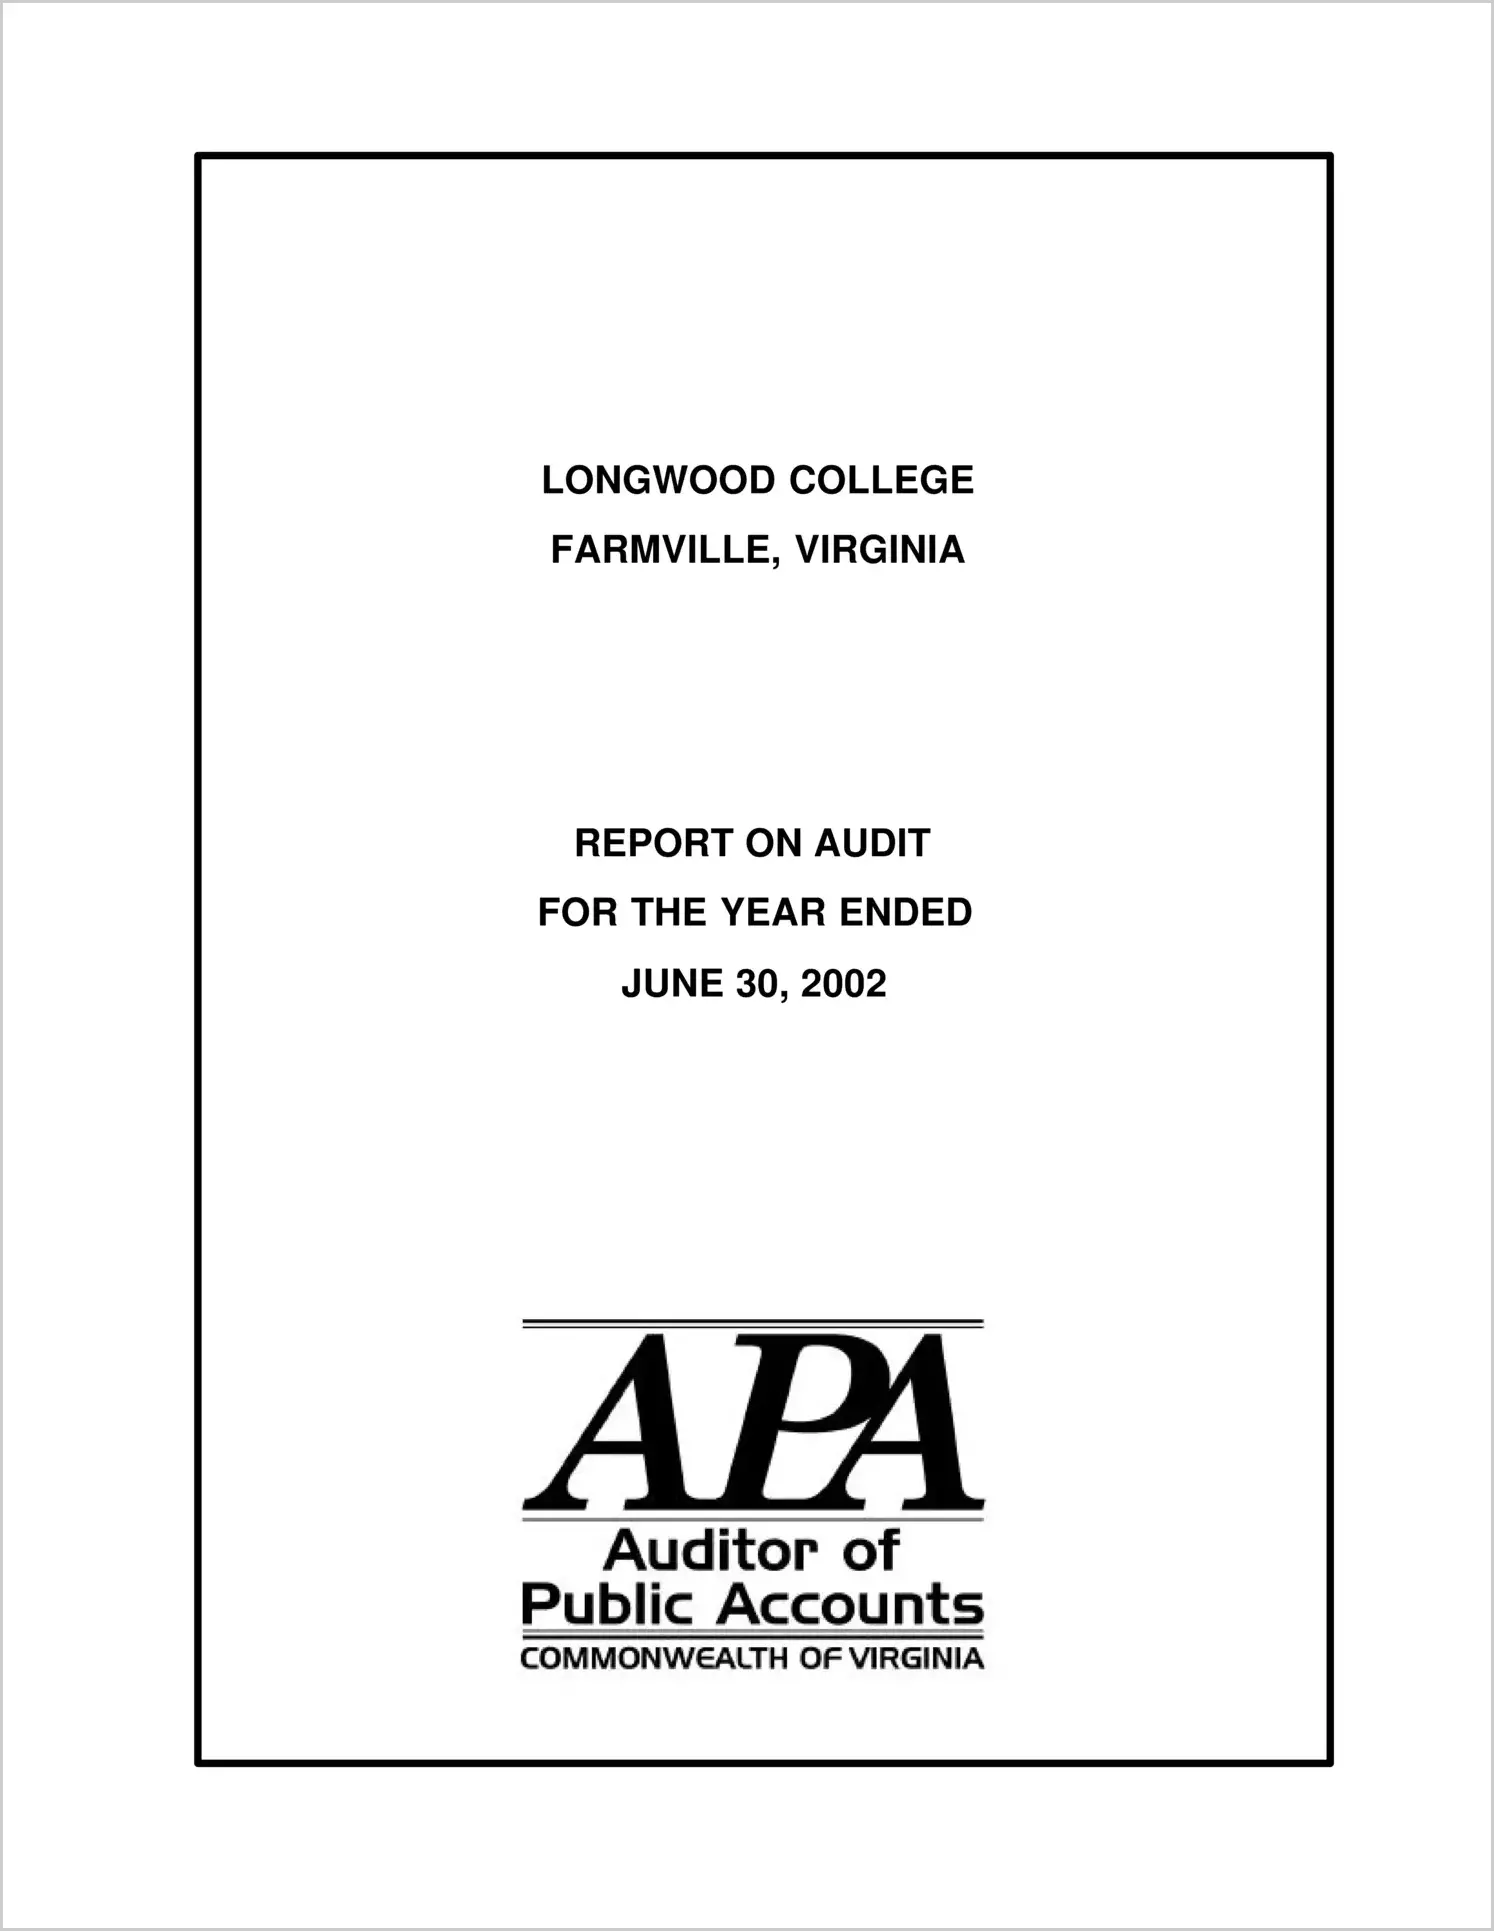 Longwood College for the year ended June 30, 2002